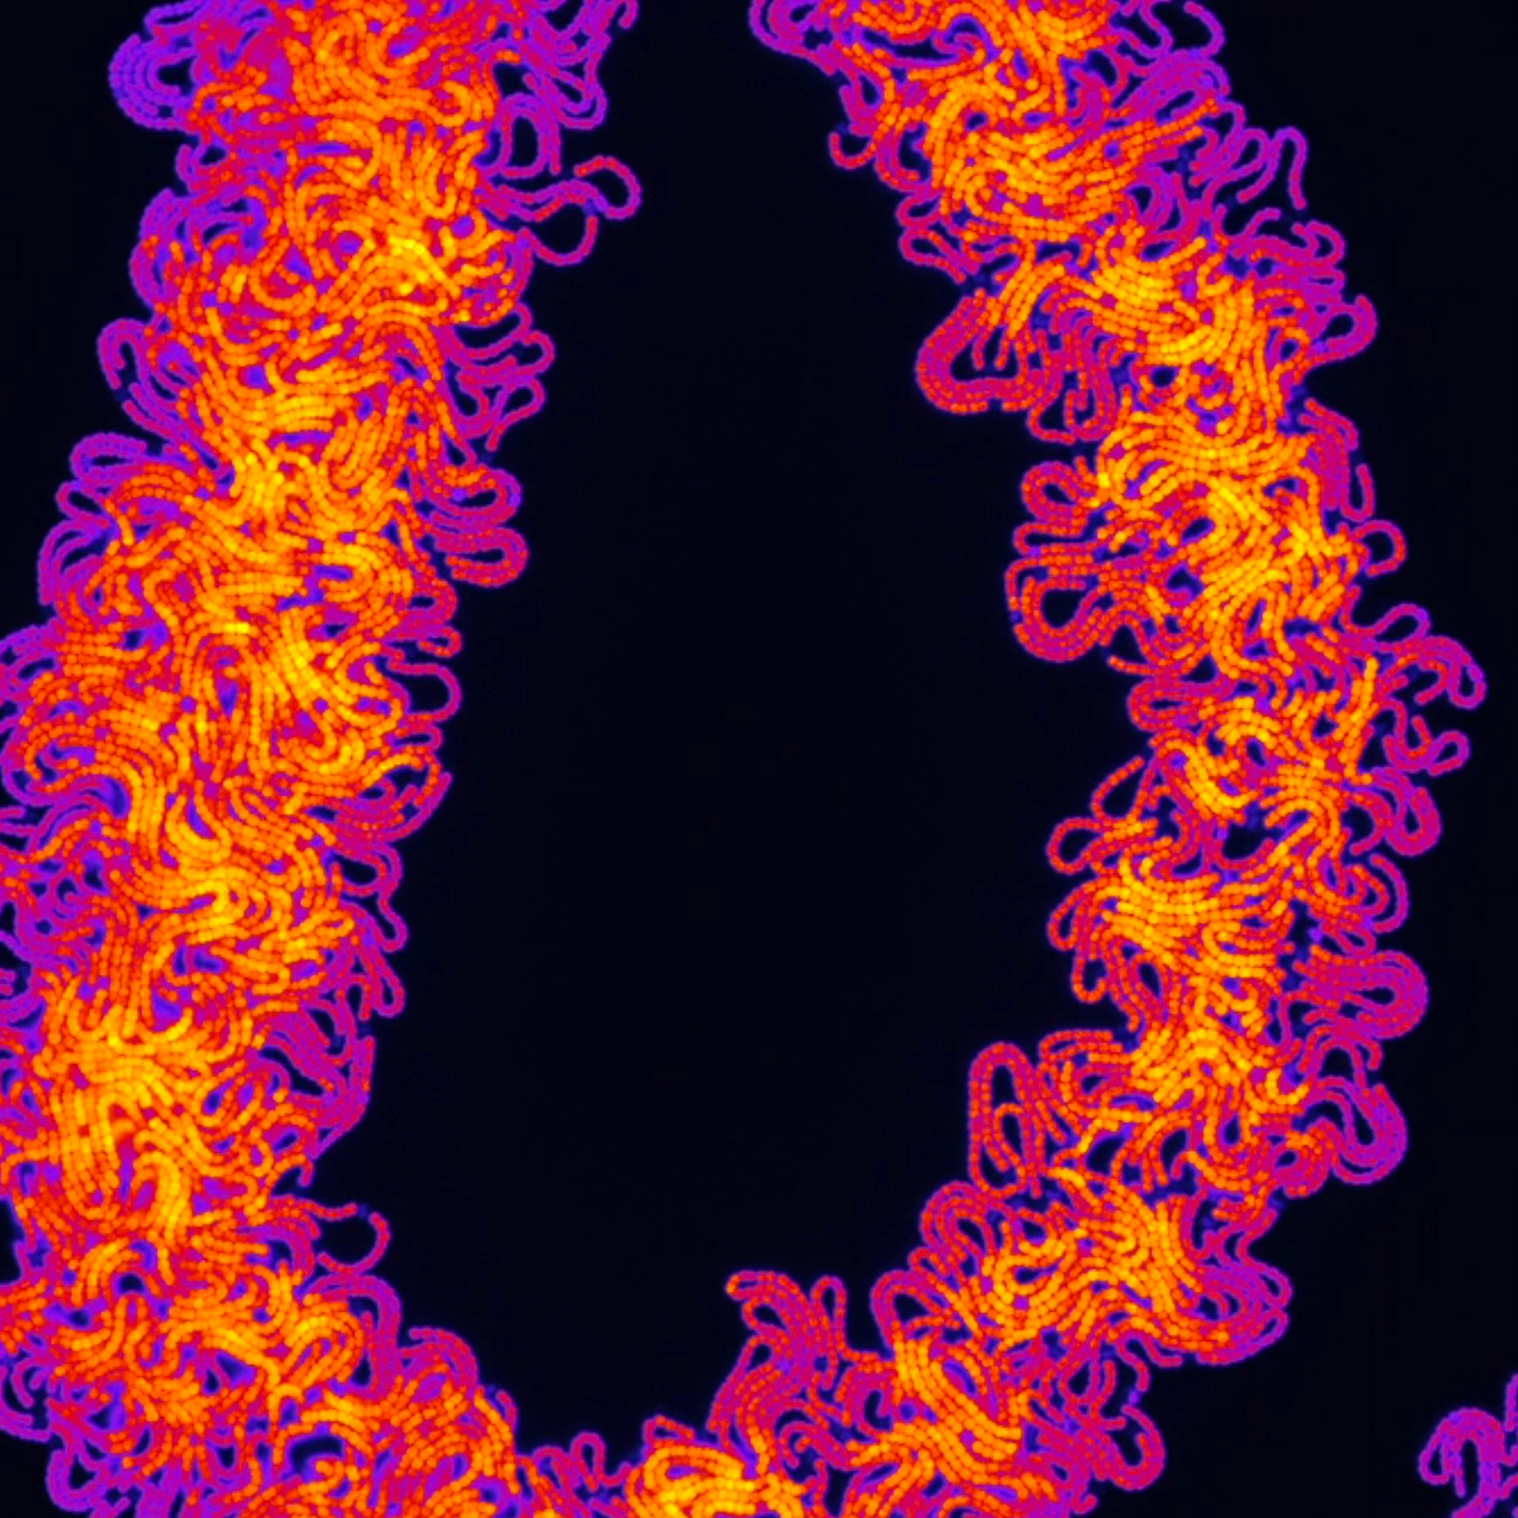 This horizontal image is a still from a film of cyanobacteria. The picture appears abstract, and features a thick bundle of orange and purple threads, looping in a U-shape from the top of the image, down to the bottom, and back up to the top. The bundle stands out vividly against the black background of the image.